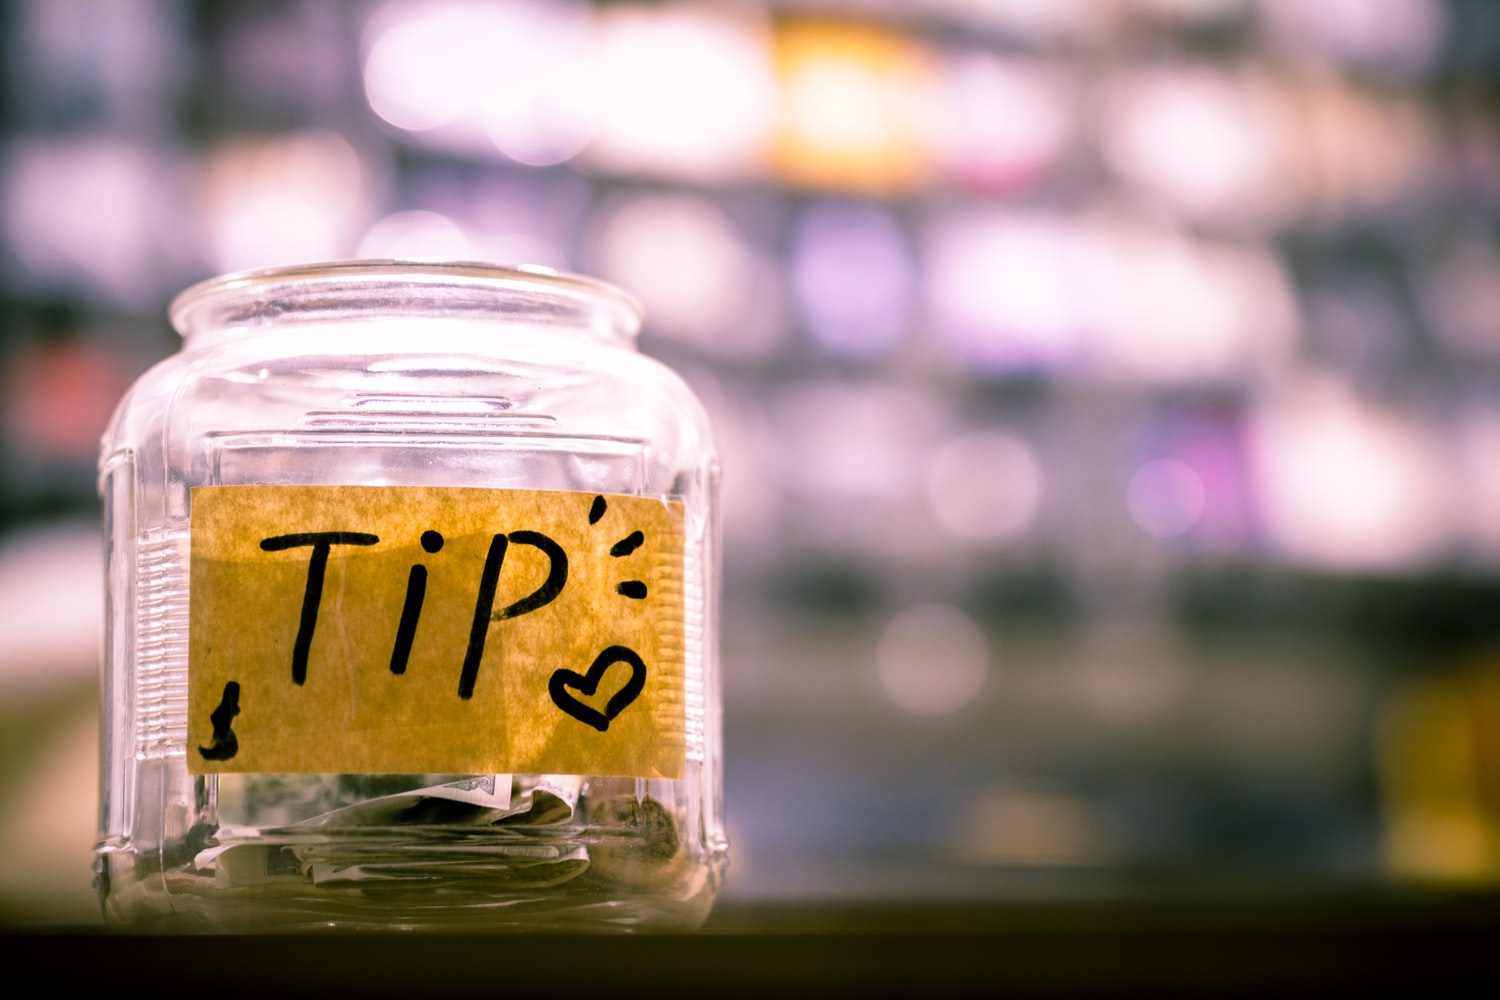 Make a change to your tipping habits.